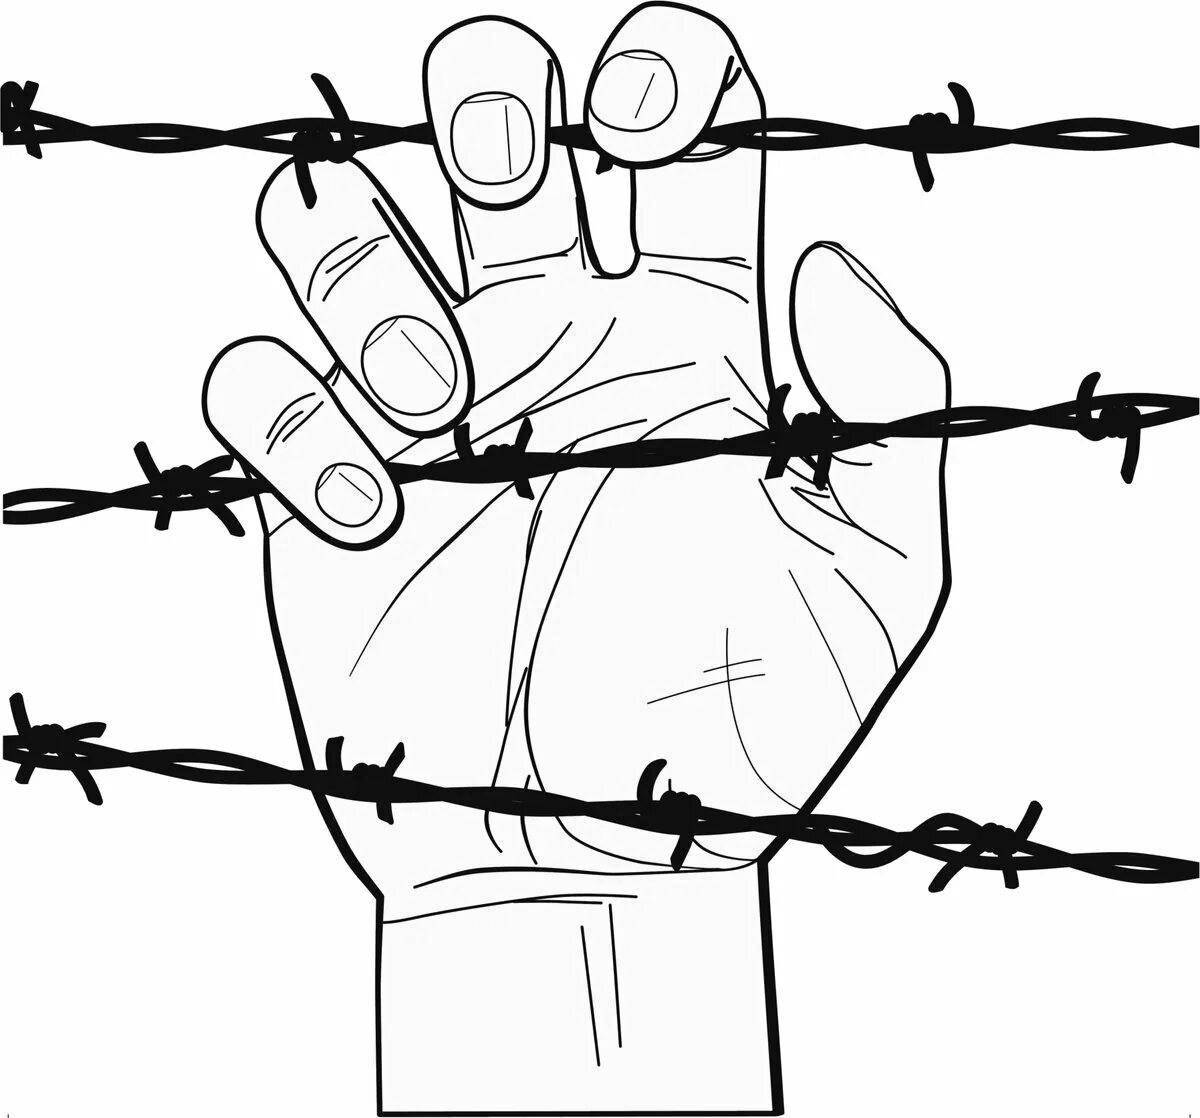 Moving the Holocaust coloring page